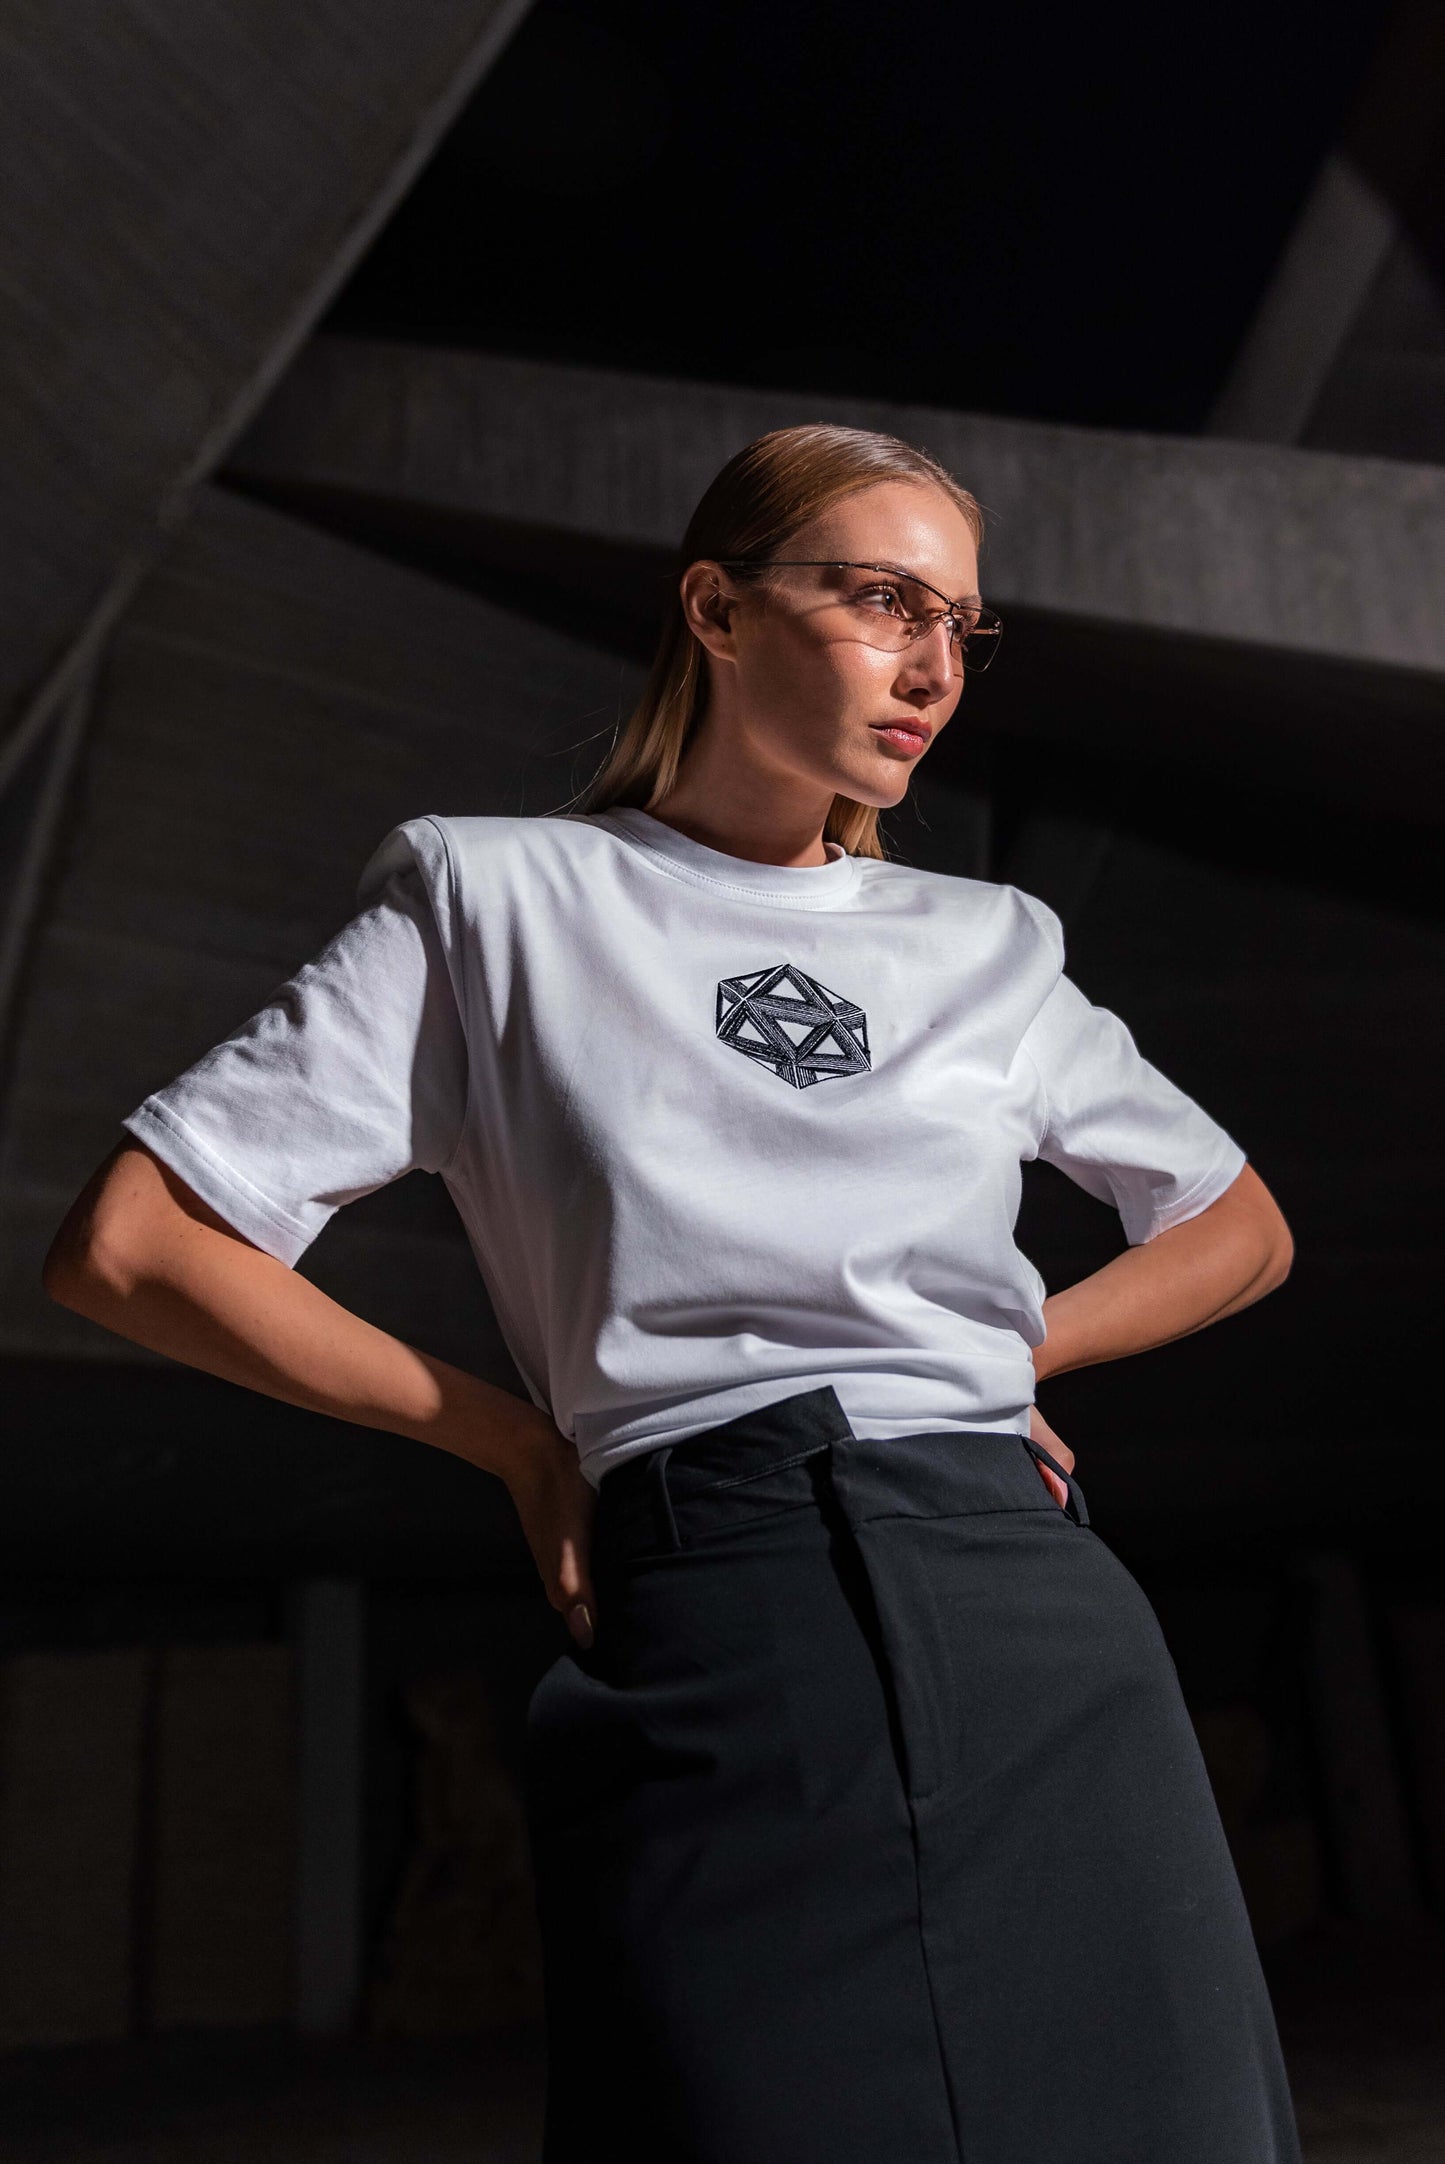 The model wears a white, oversized silhouette t-shirt with ICOSahedron embroidery in black. The outfit also contains a long skirt with a slit, boots and sunglasses, complimenting the white t-shirt with ICOSahedron embroidery. An editorial photograph in an architectural monument in Plovdiv, Bulgaria.